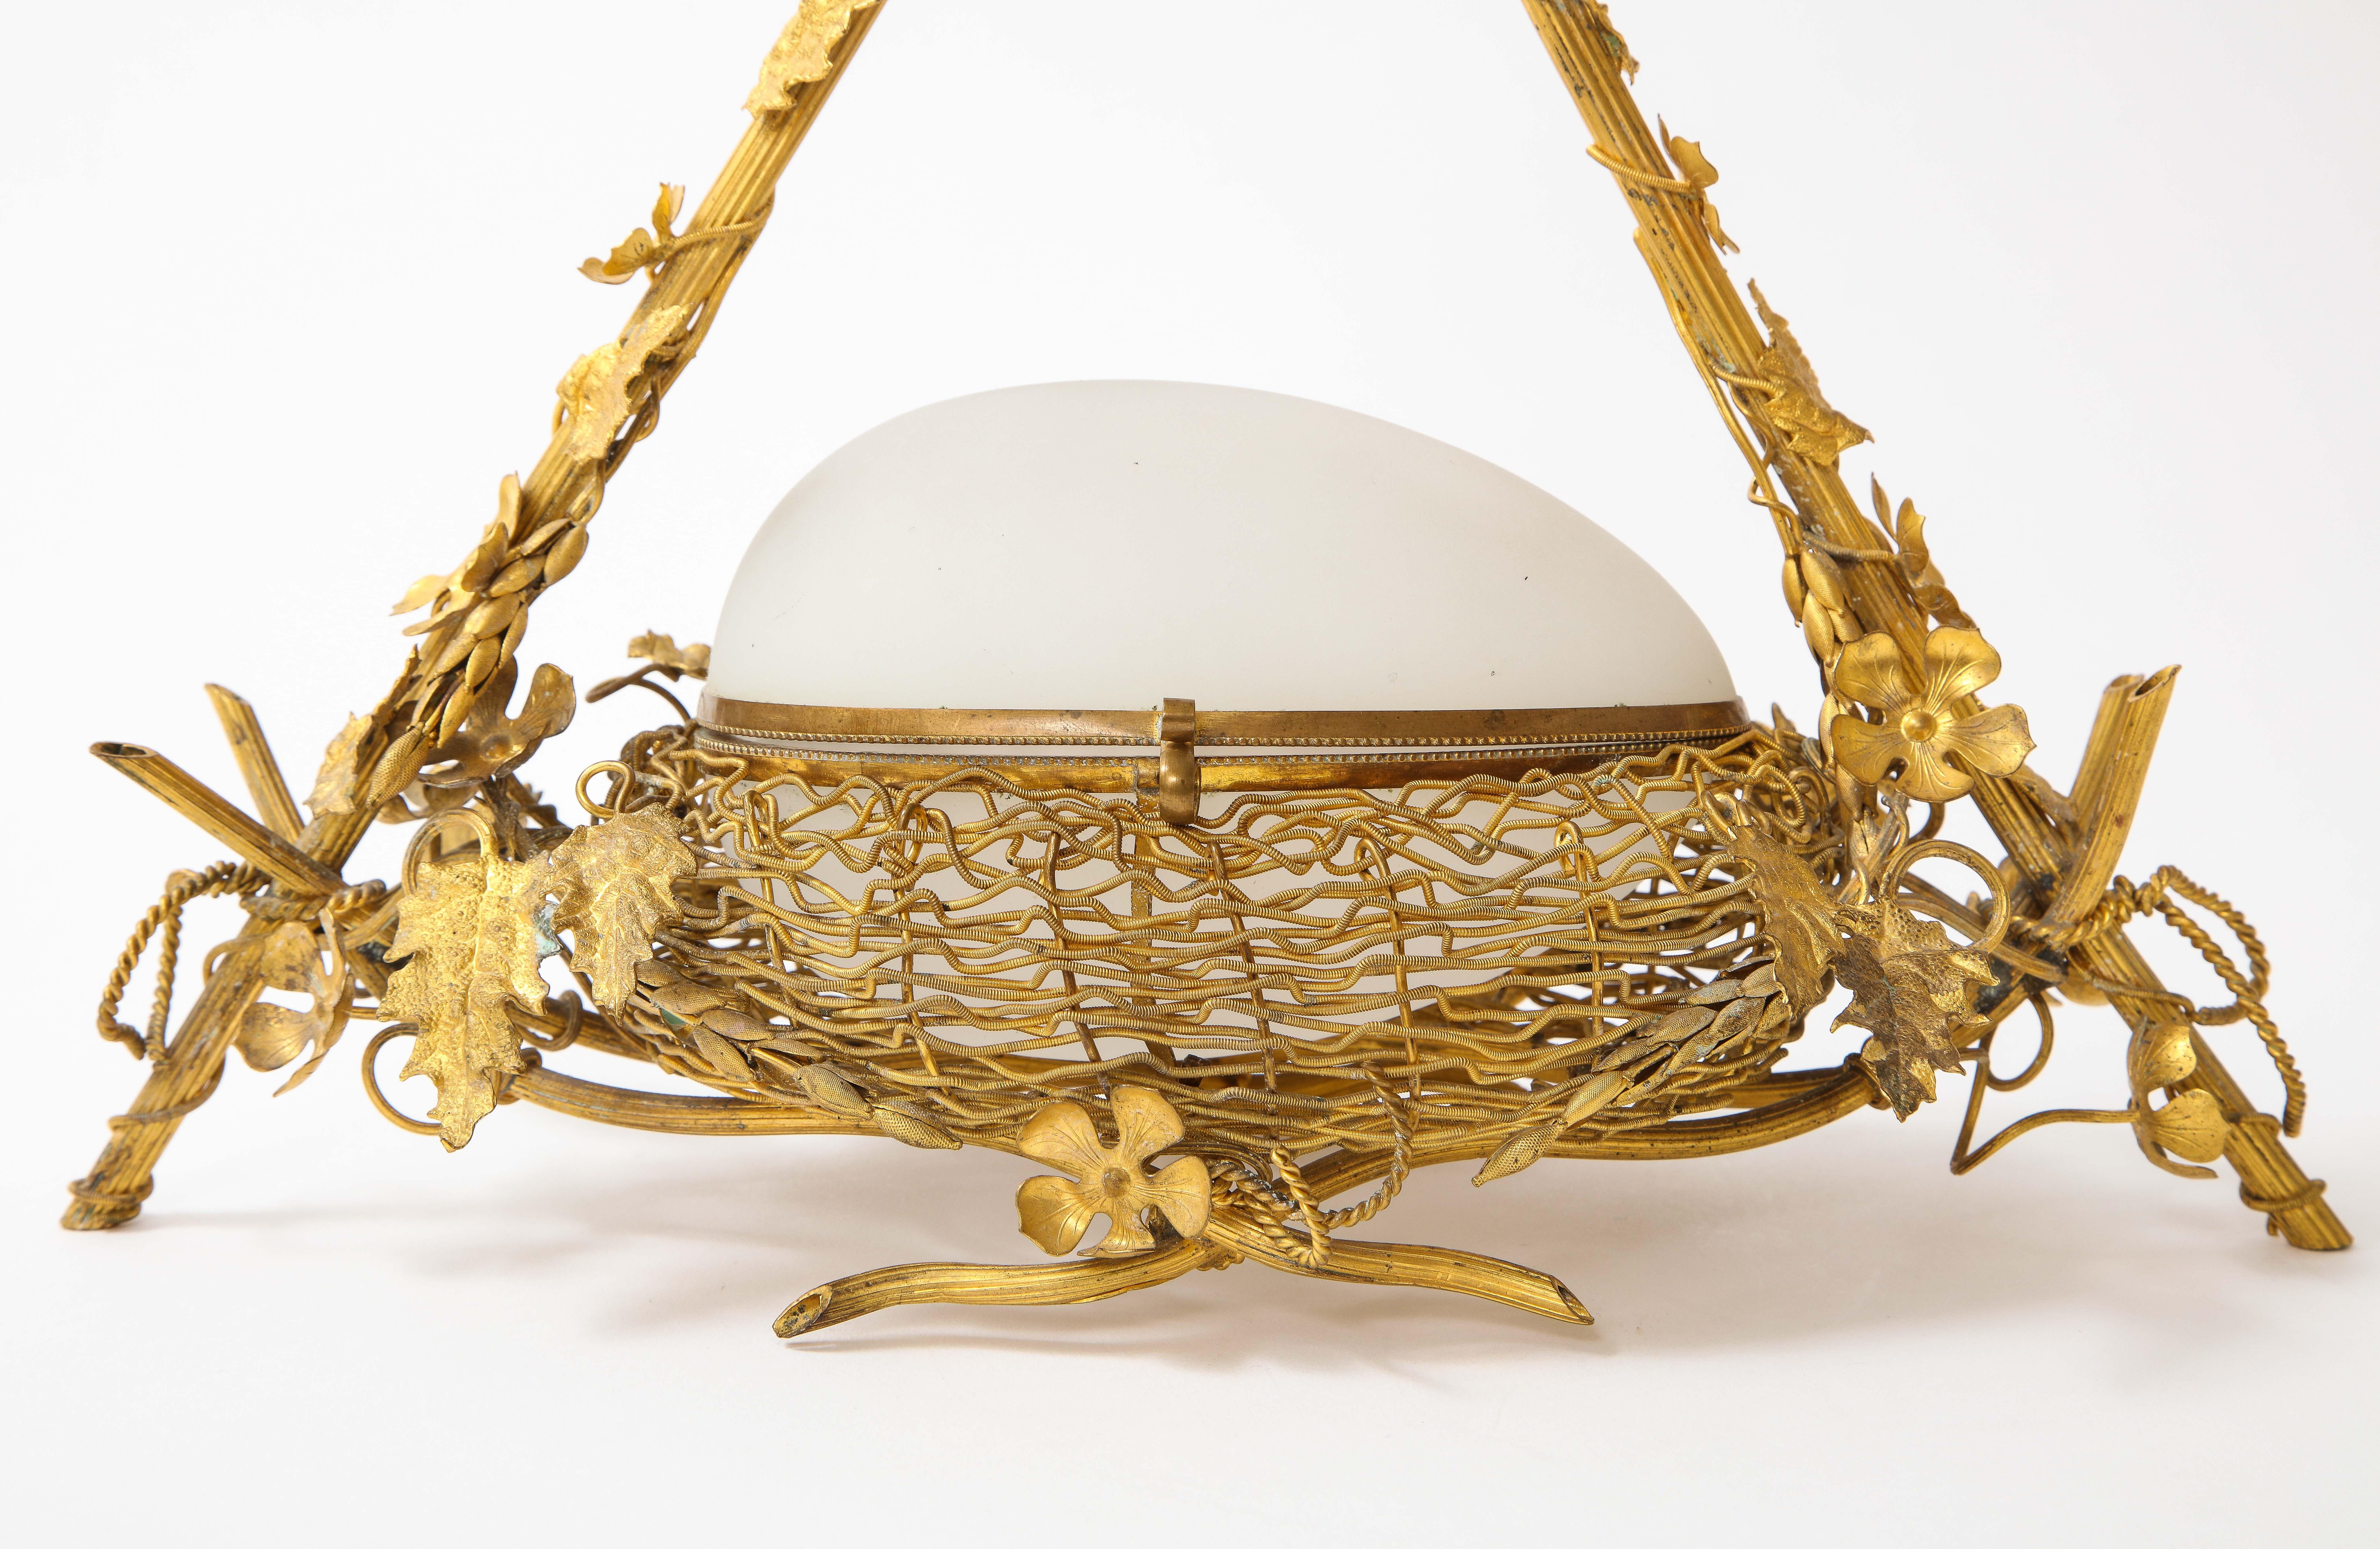 A 19th C. French Dore Bronze Mounted White Opaline Egg Form Covered Nesting Box For Sale 5